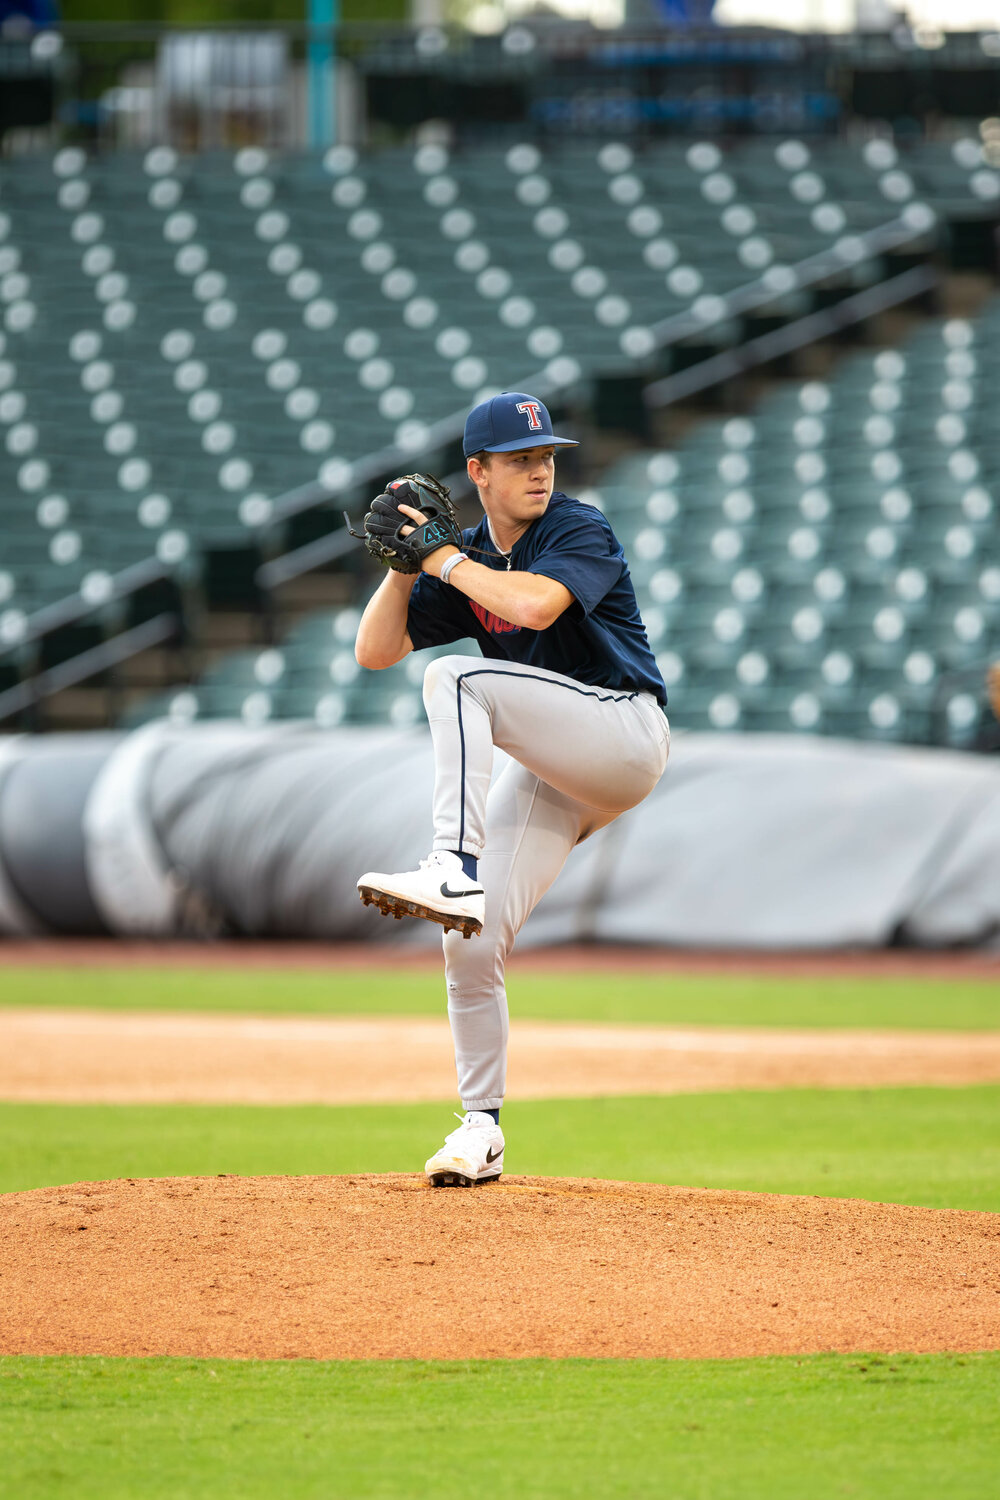 Kaden Bertrand pitches during the GHBCA Seniors All-Star game at Constellation Field in Sugar Land.